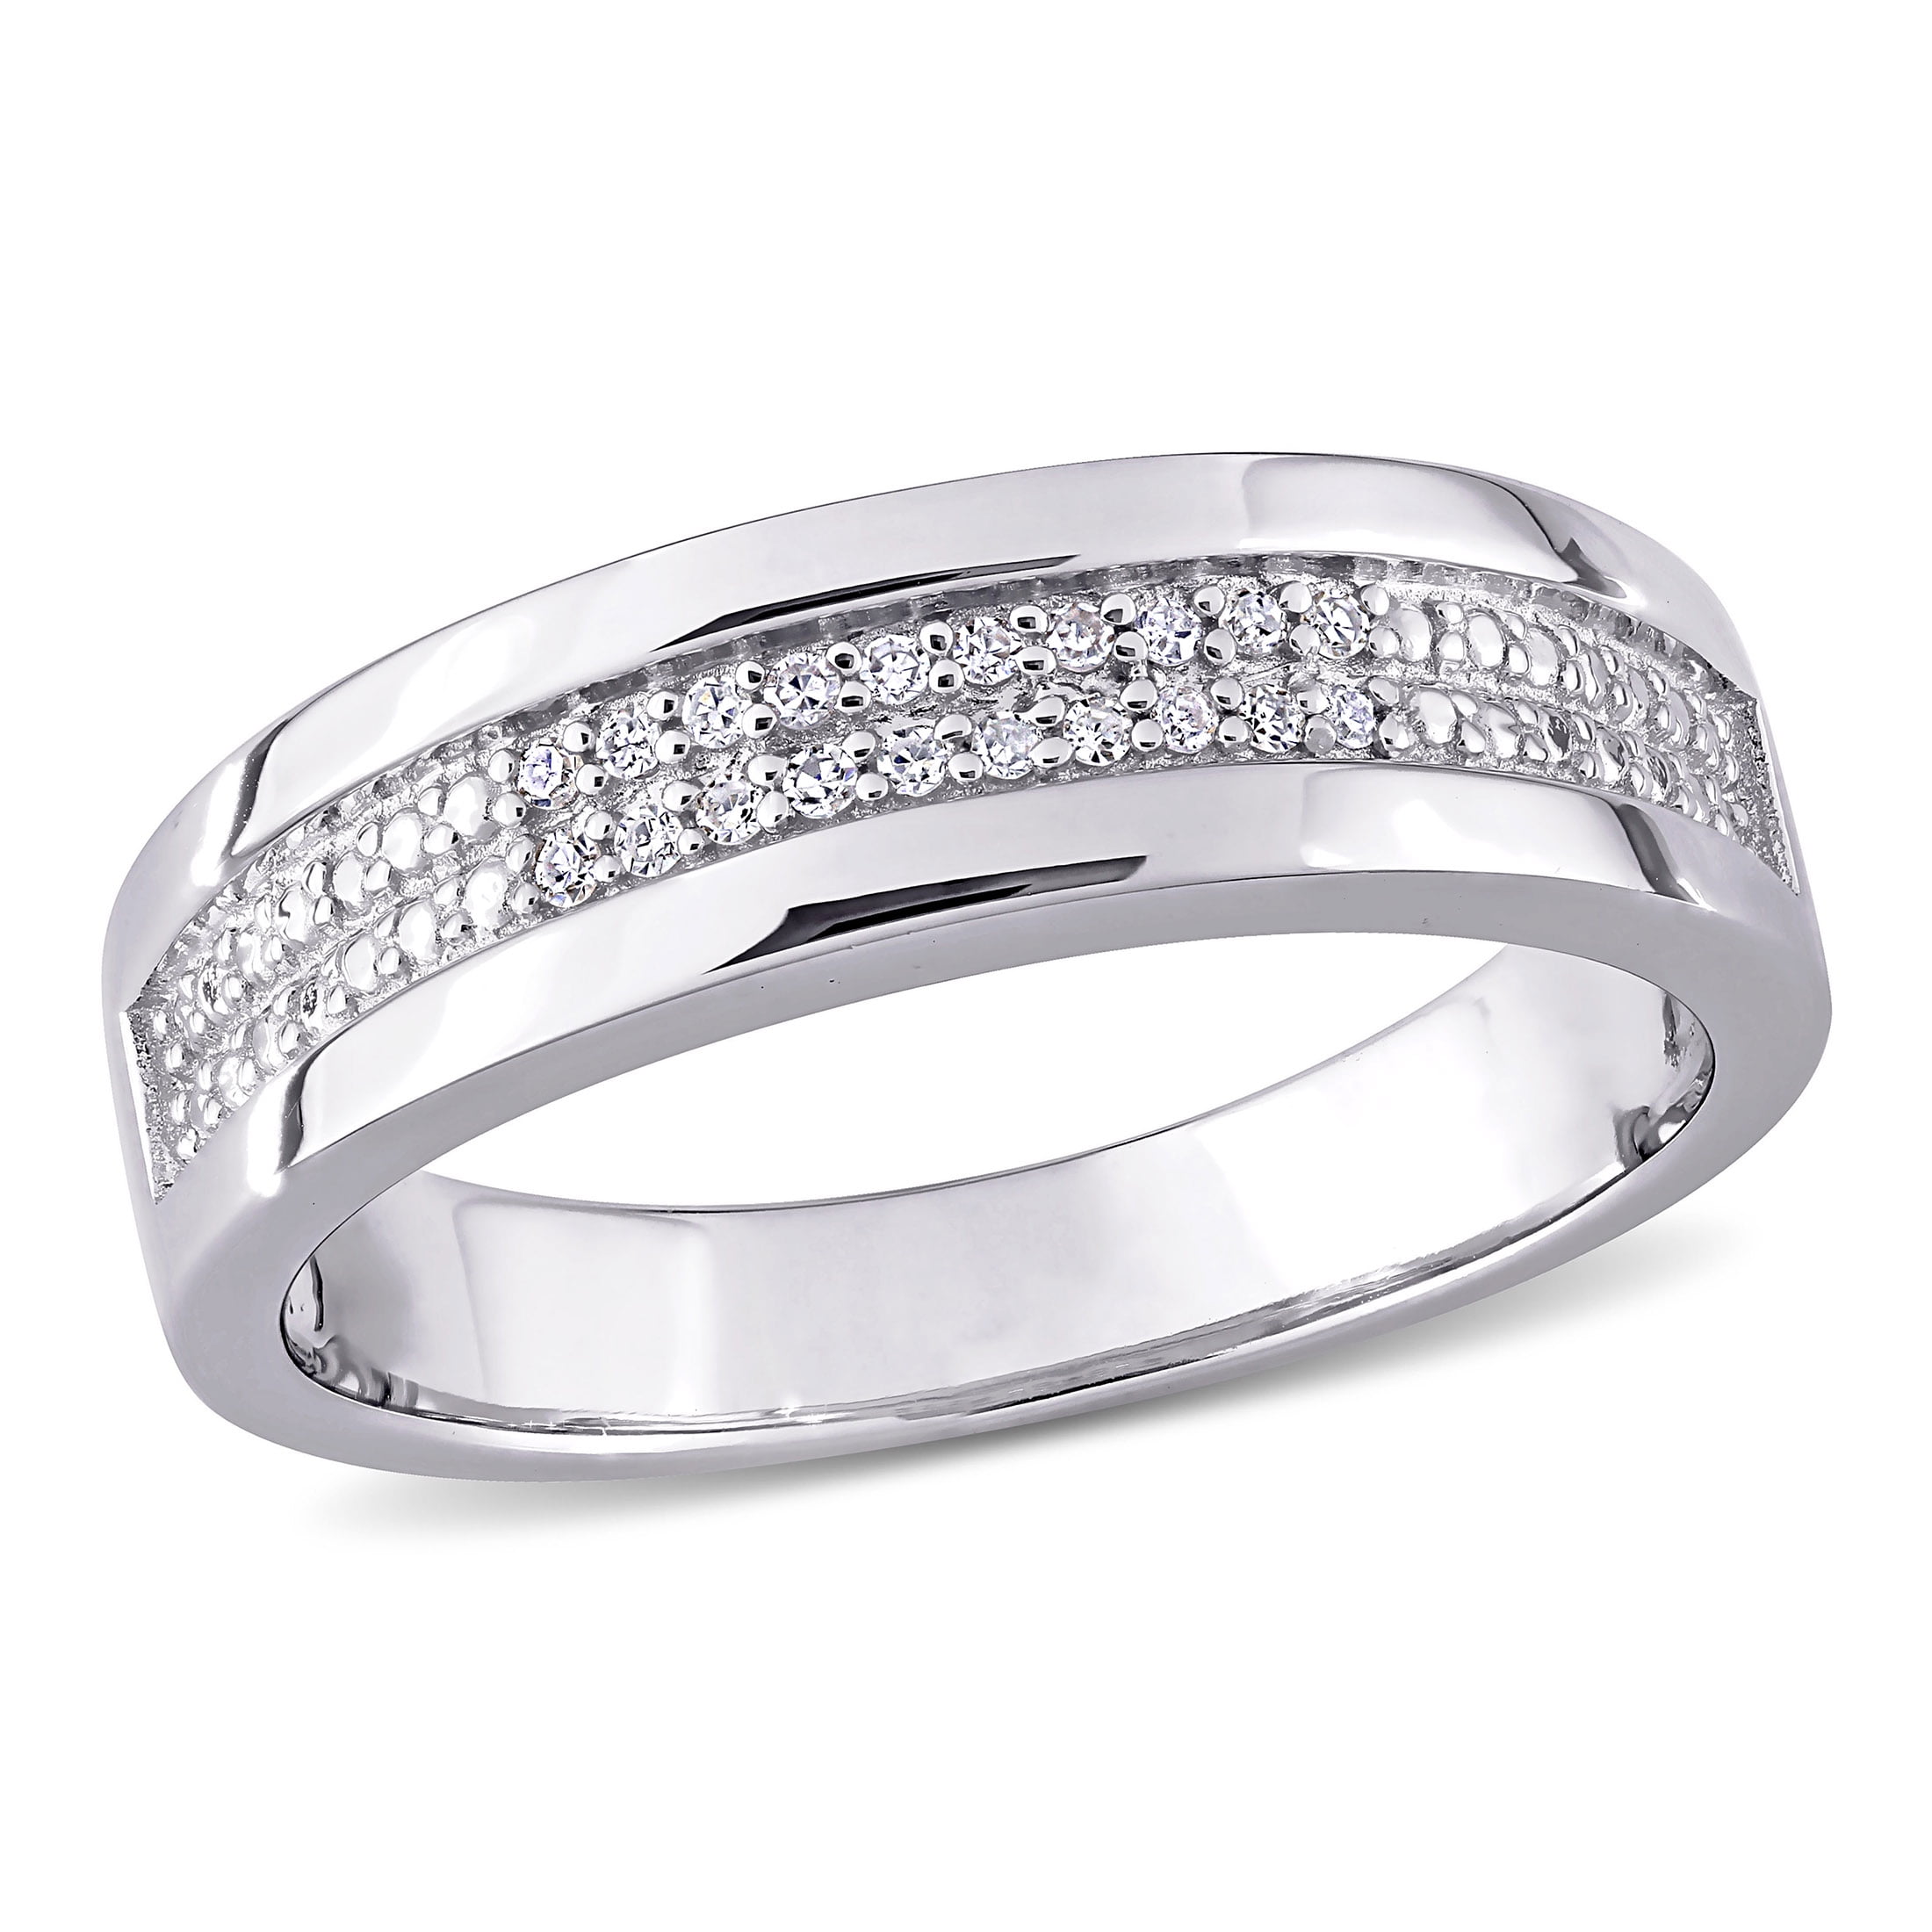 1 CARAT .925 STERLING SILVER ROUND CUT WEDDING  ETERNITY RING BAND FREE RING BOX 